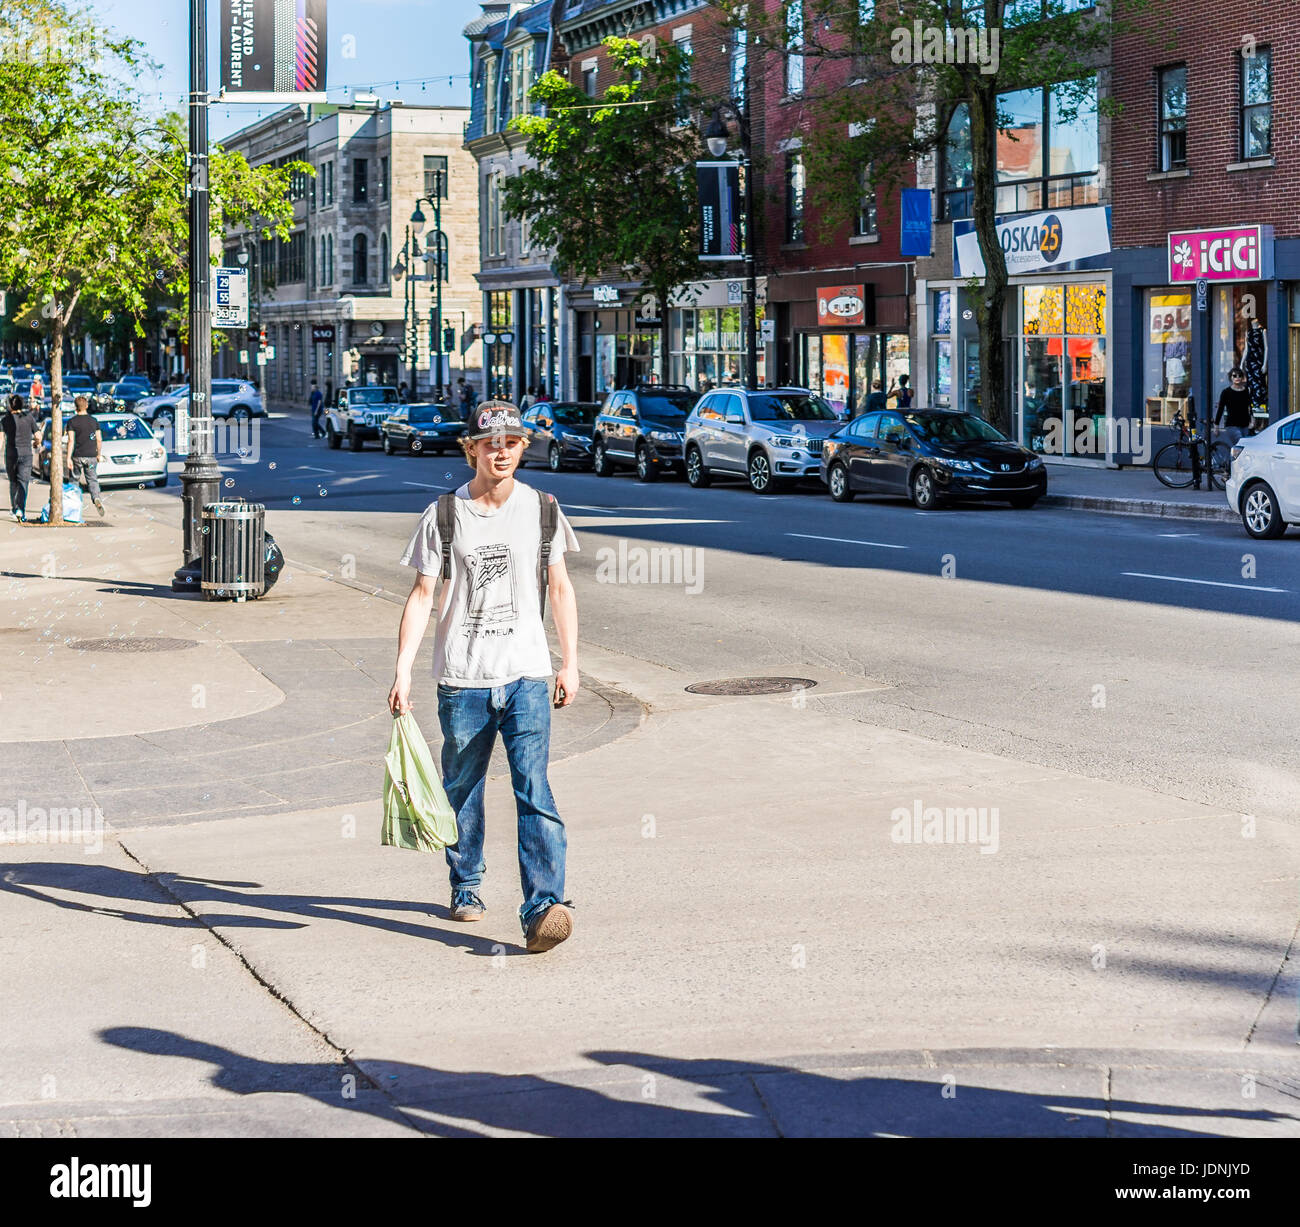 Montreal, Canada - May 27, 2017: Young man crossing street on Saint Laurent boulevard in Montreal's Plateau Mont Royal in Quebec region Stock Photo